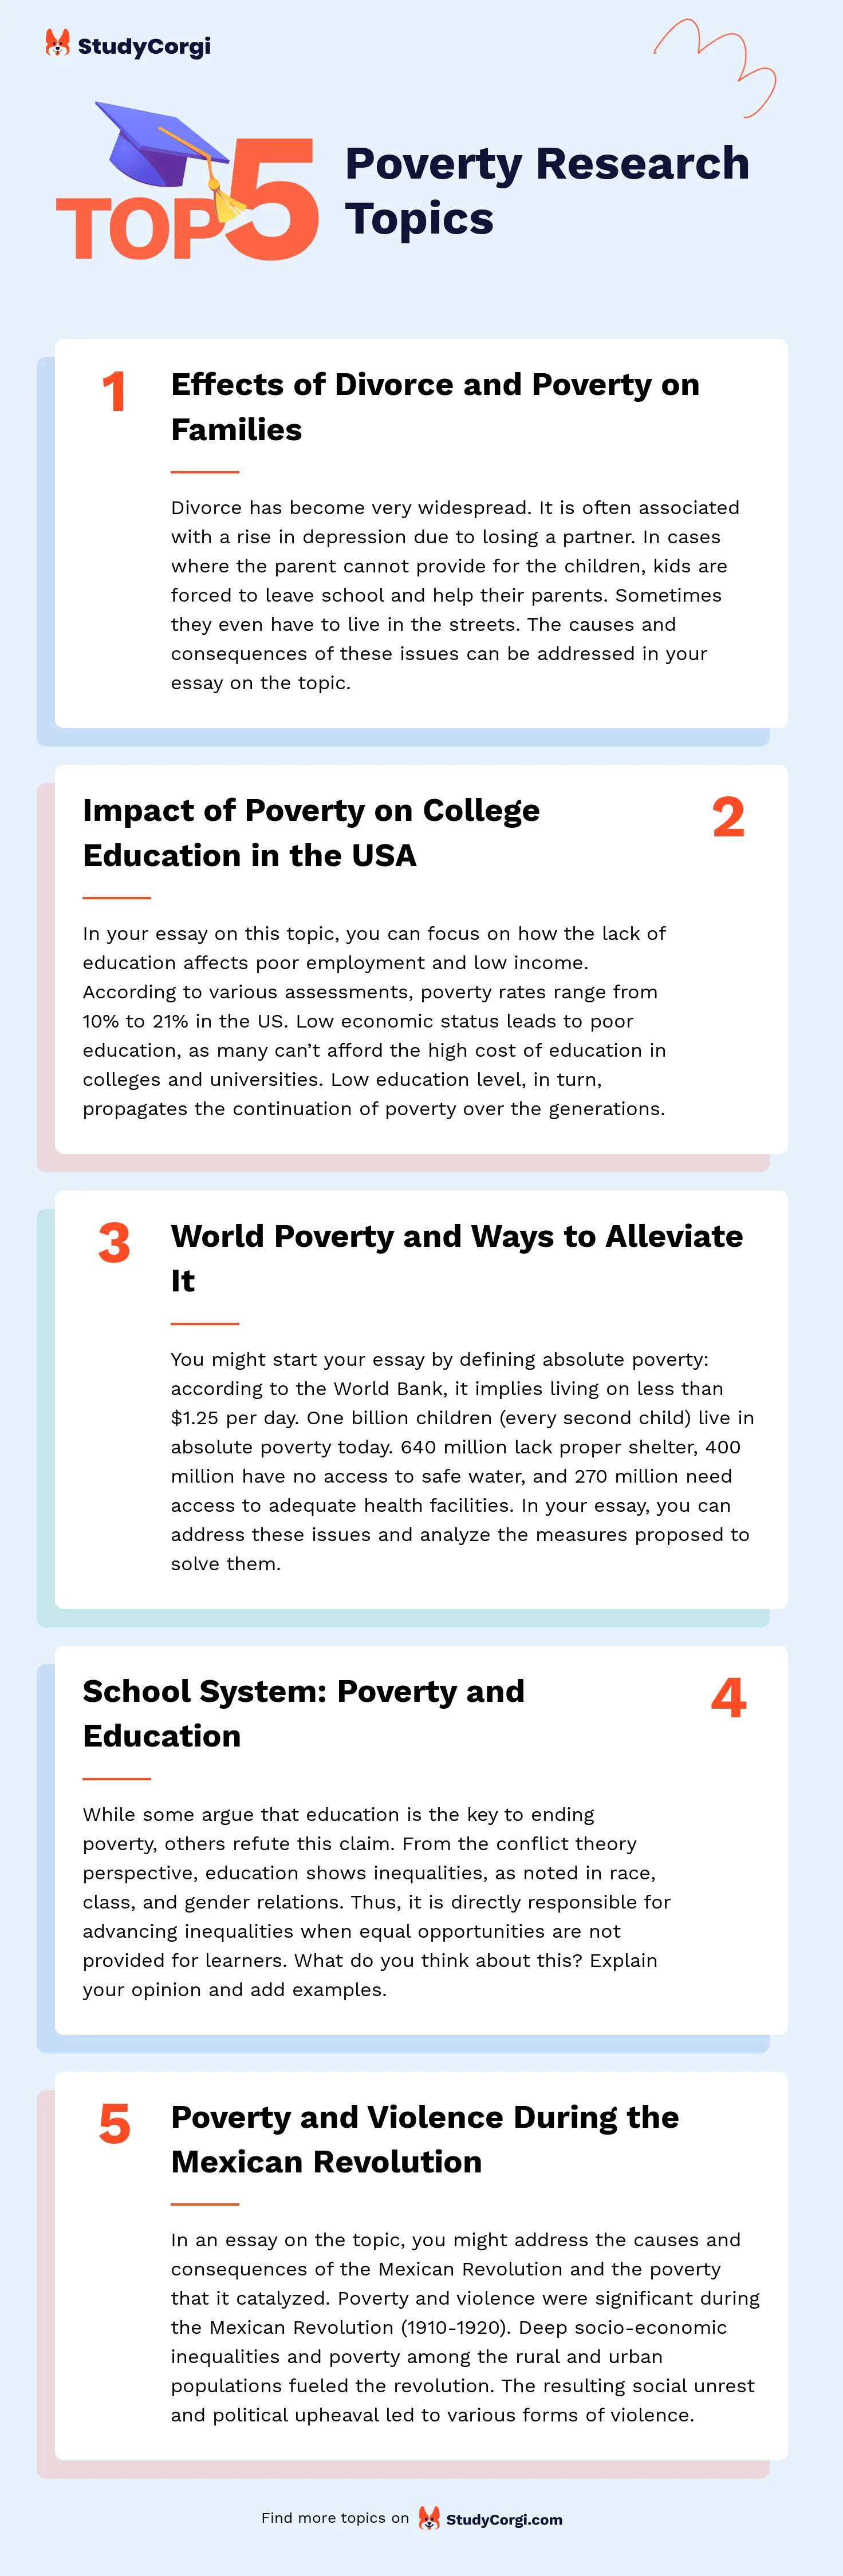 TOP-5 Poverty Research Topics